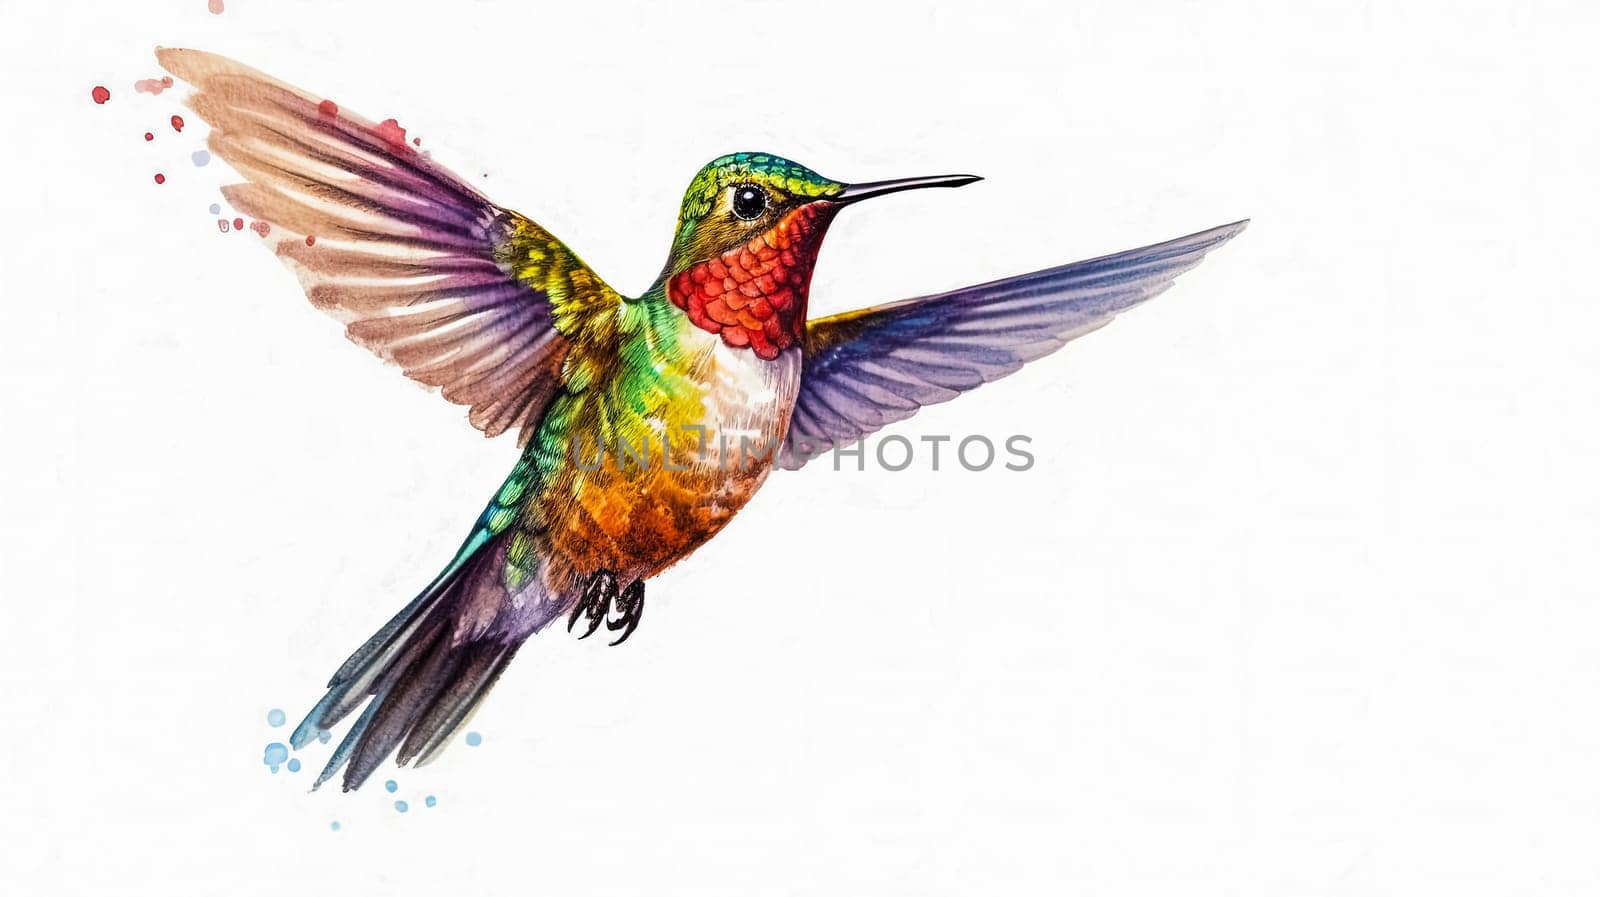 A captivating watercolor portrayal capturing the graceful flight of a calibri bird, showcasing its elegance and beauty in stunning detail. Perfect for artistic projects and nature themed designs.